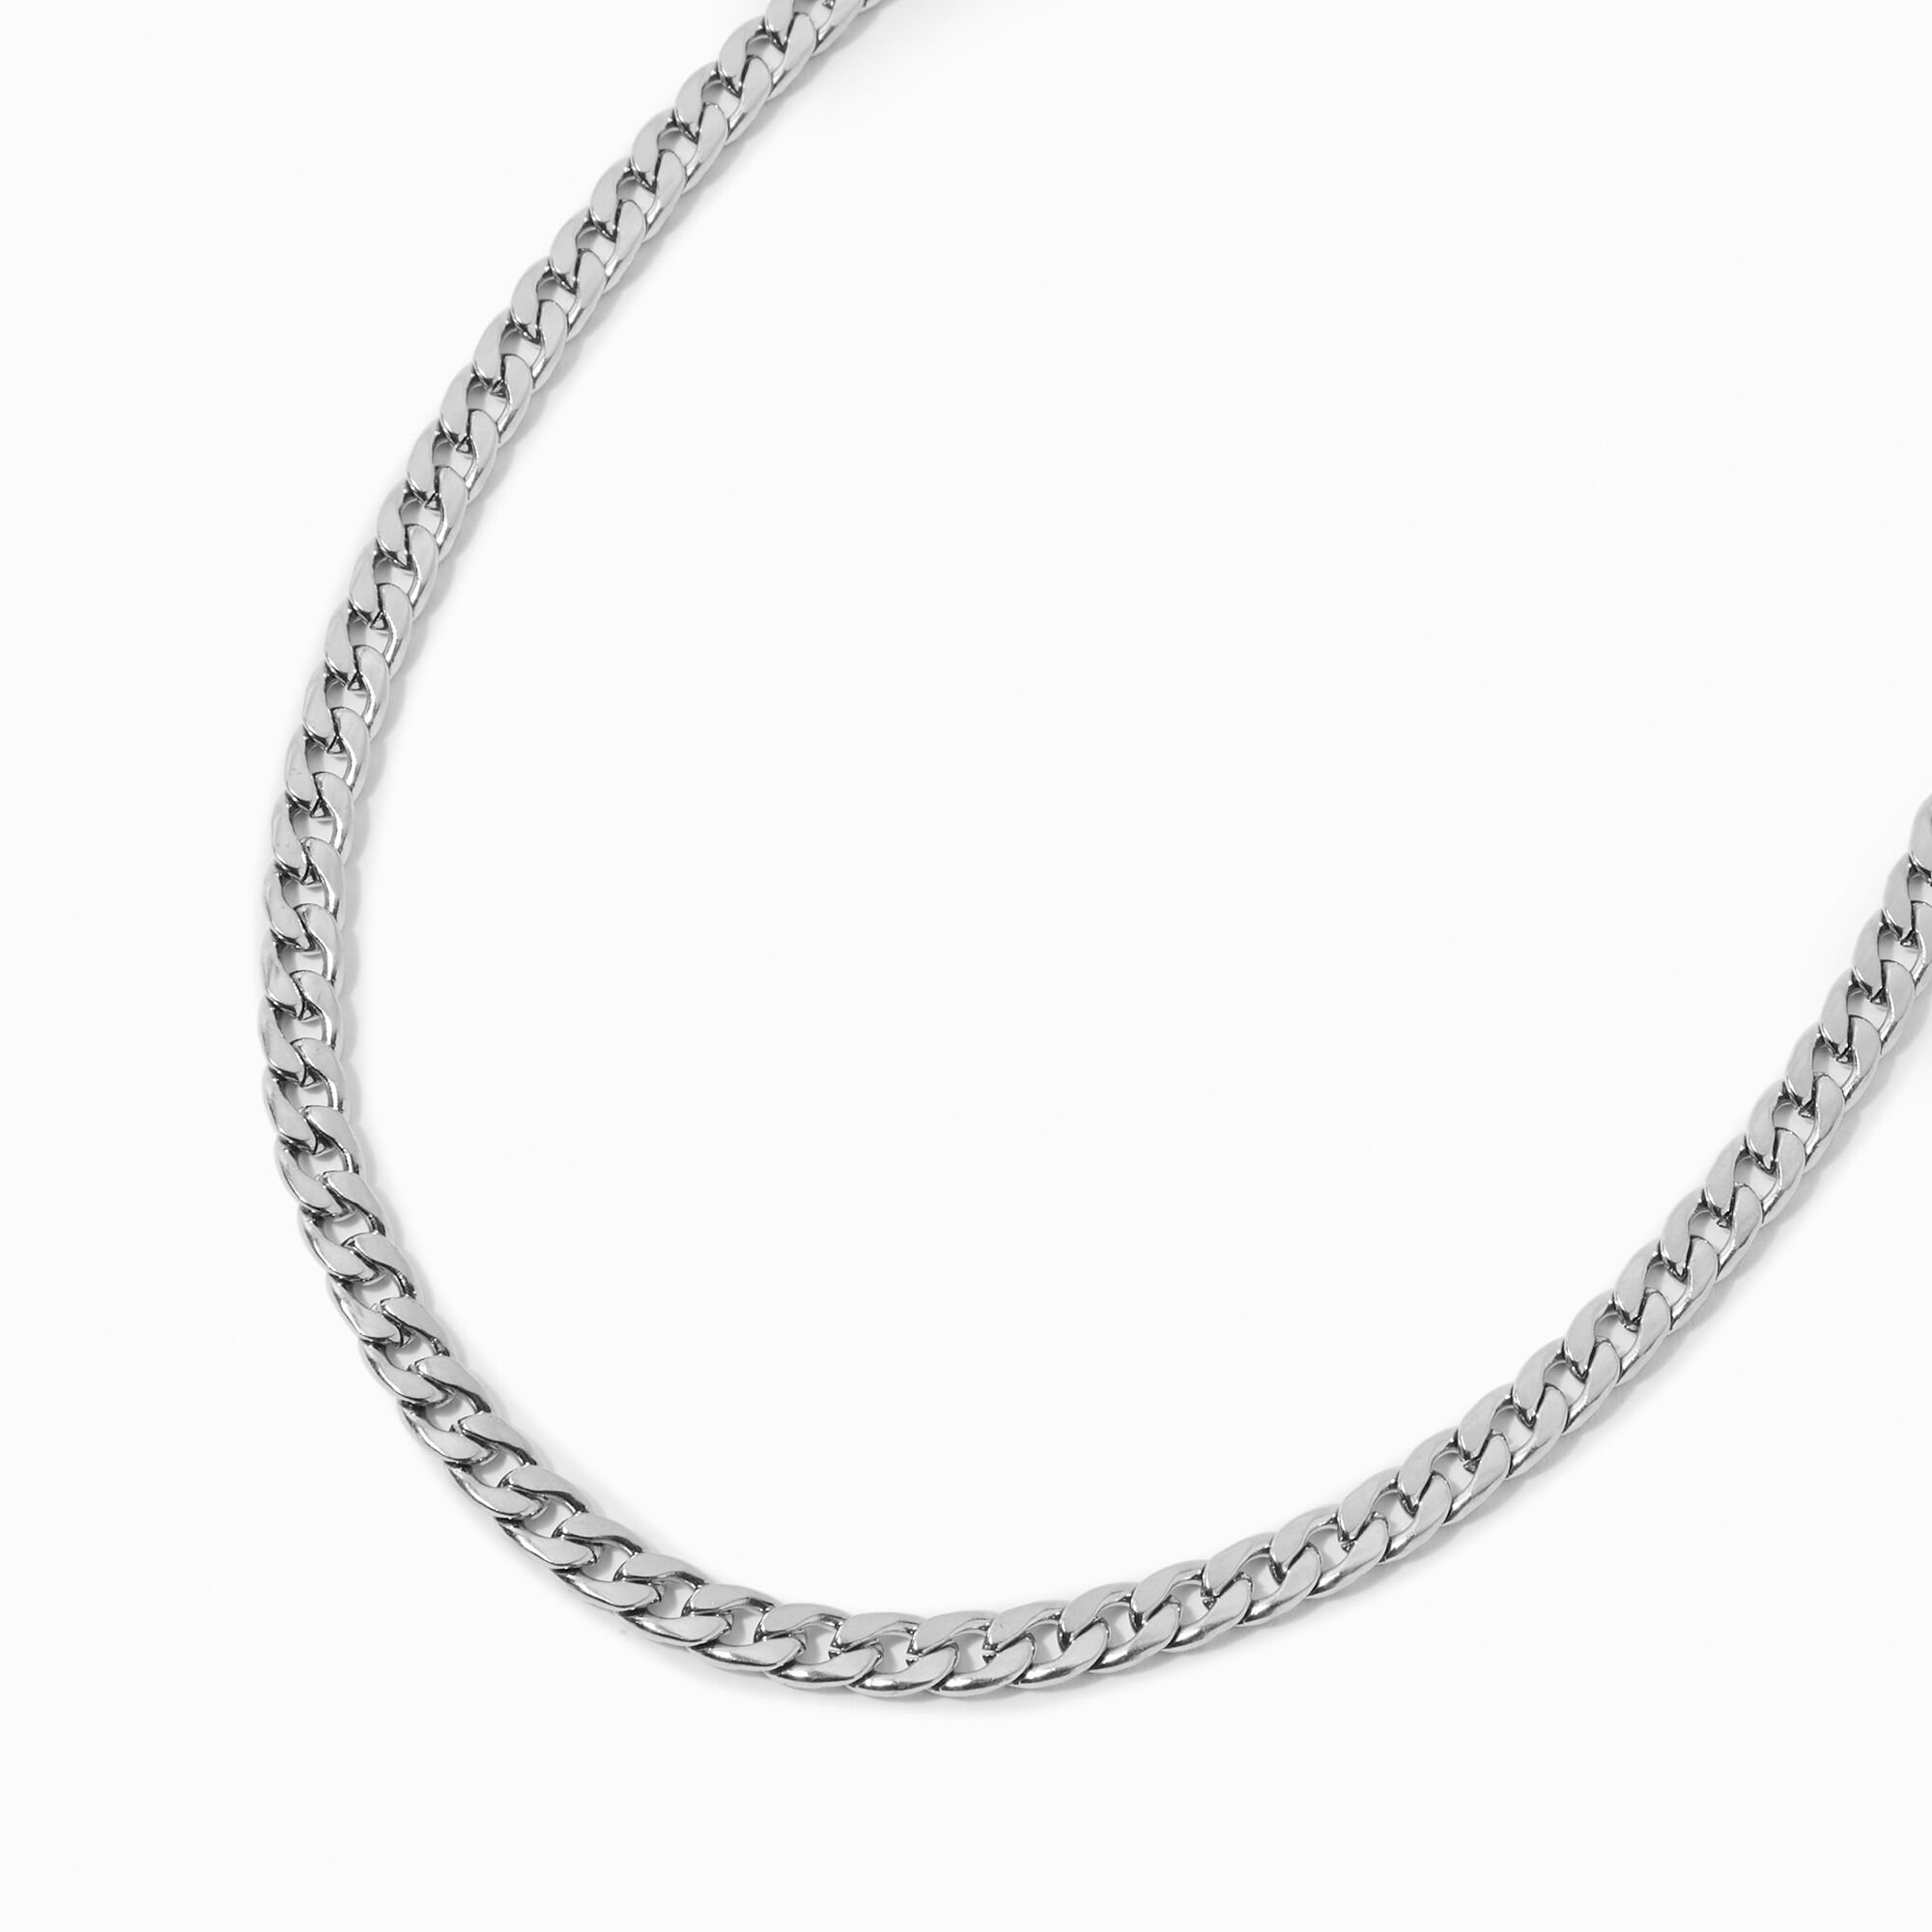 View Claires Tone Stainless Steel 6MM Curb Chain Necklace Silver information